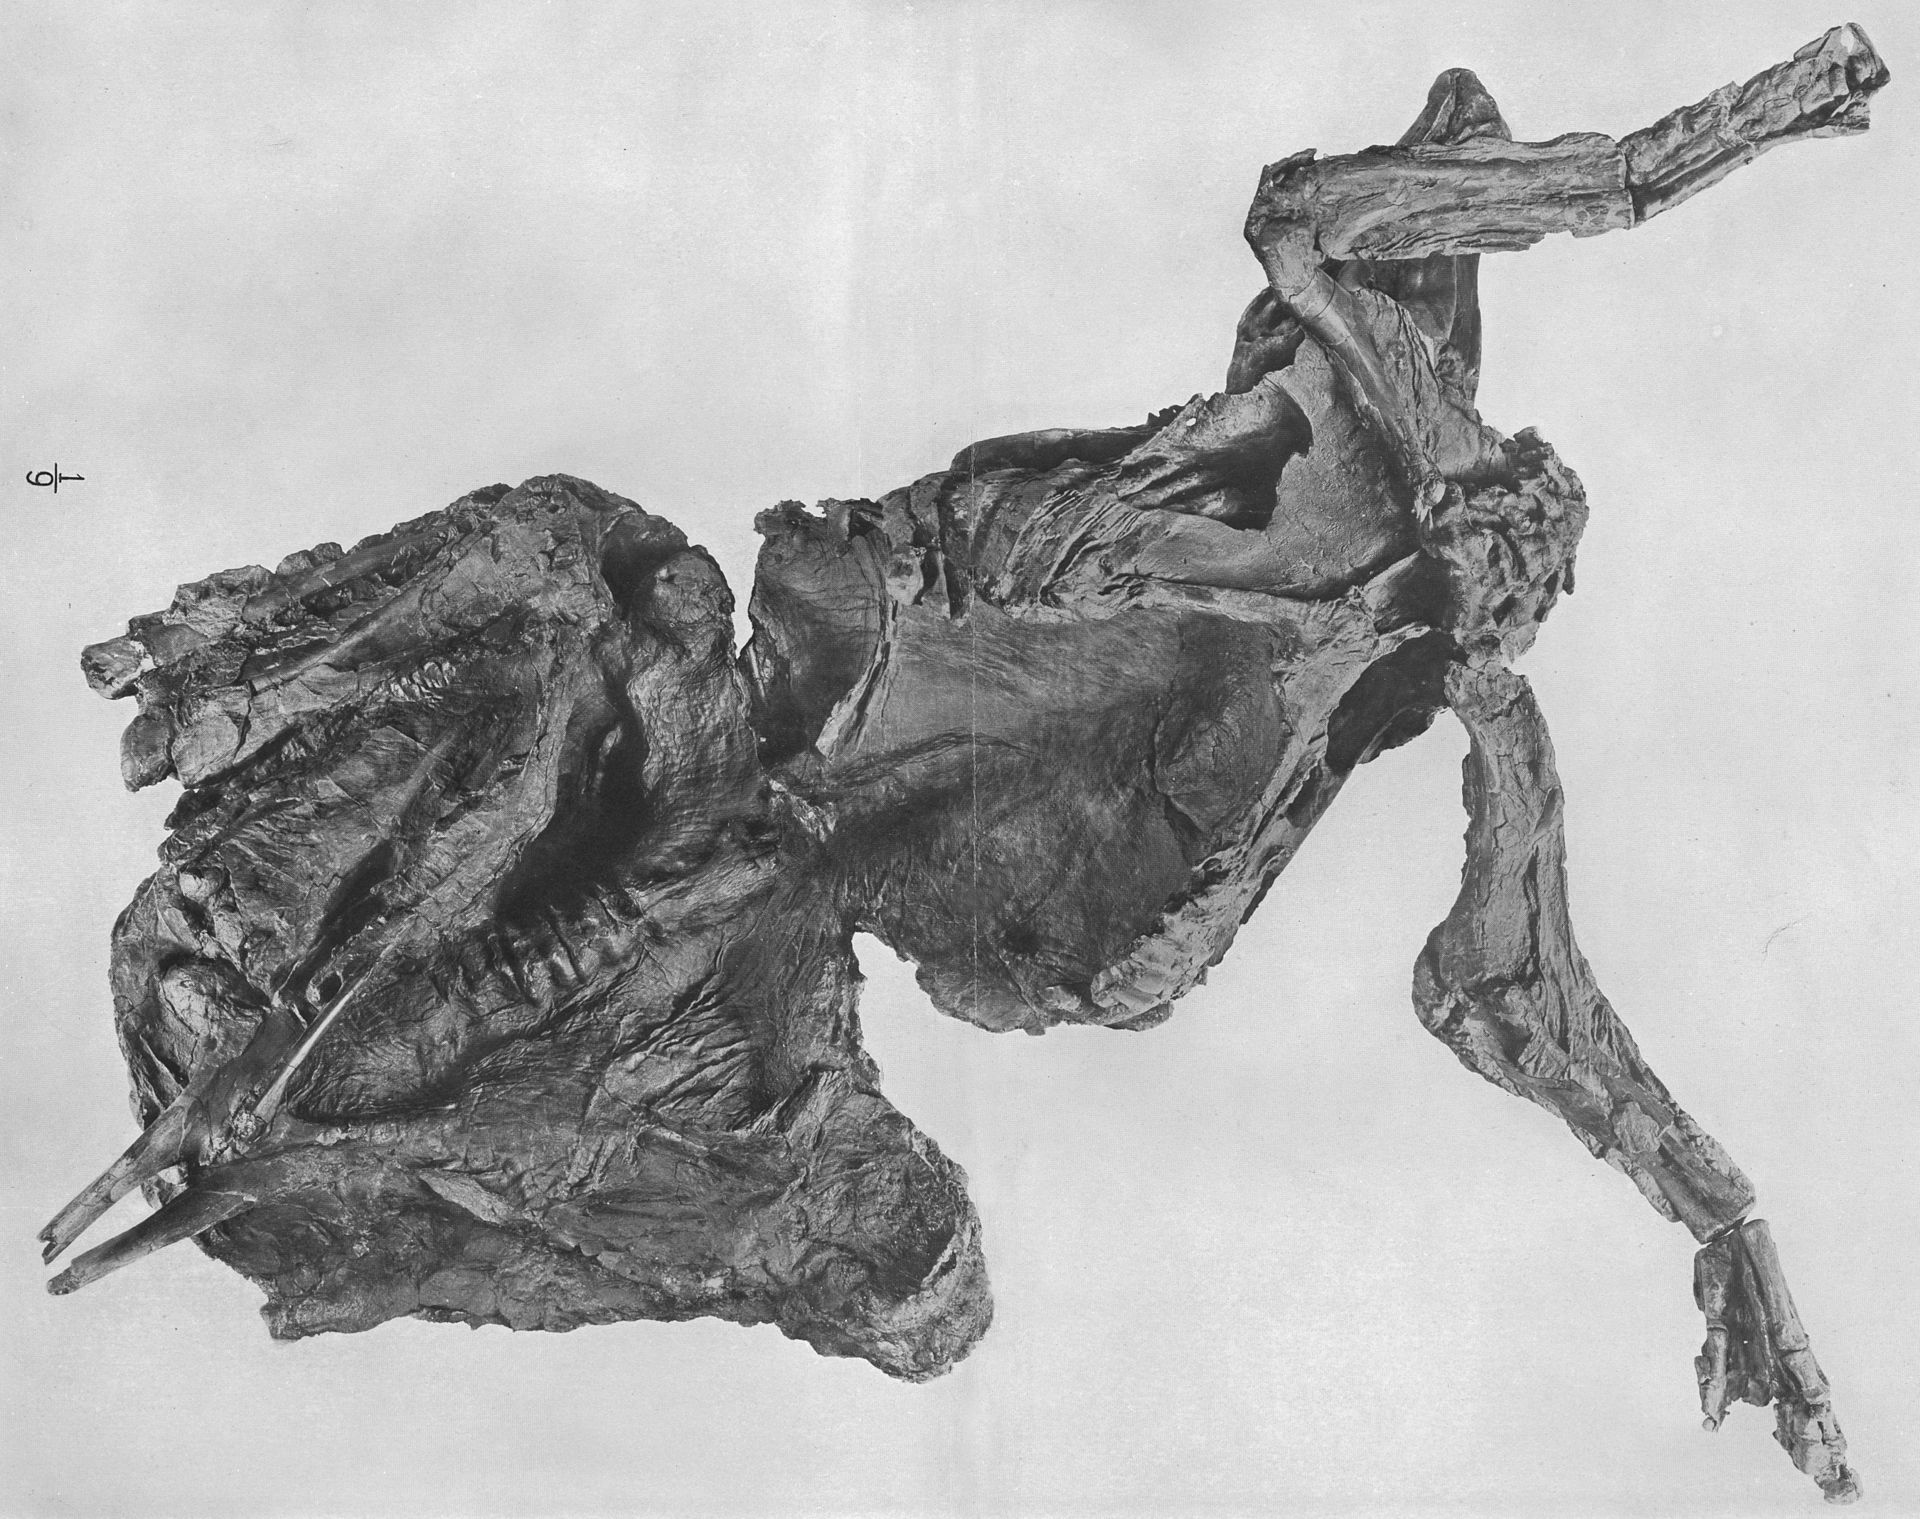 View of the right side of the mummy